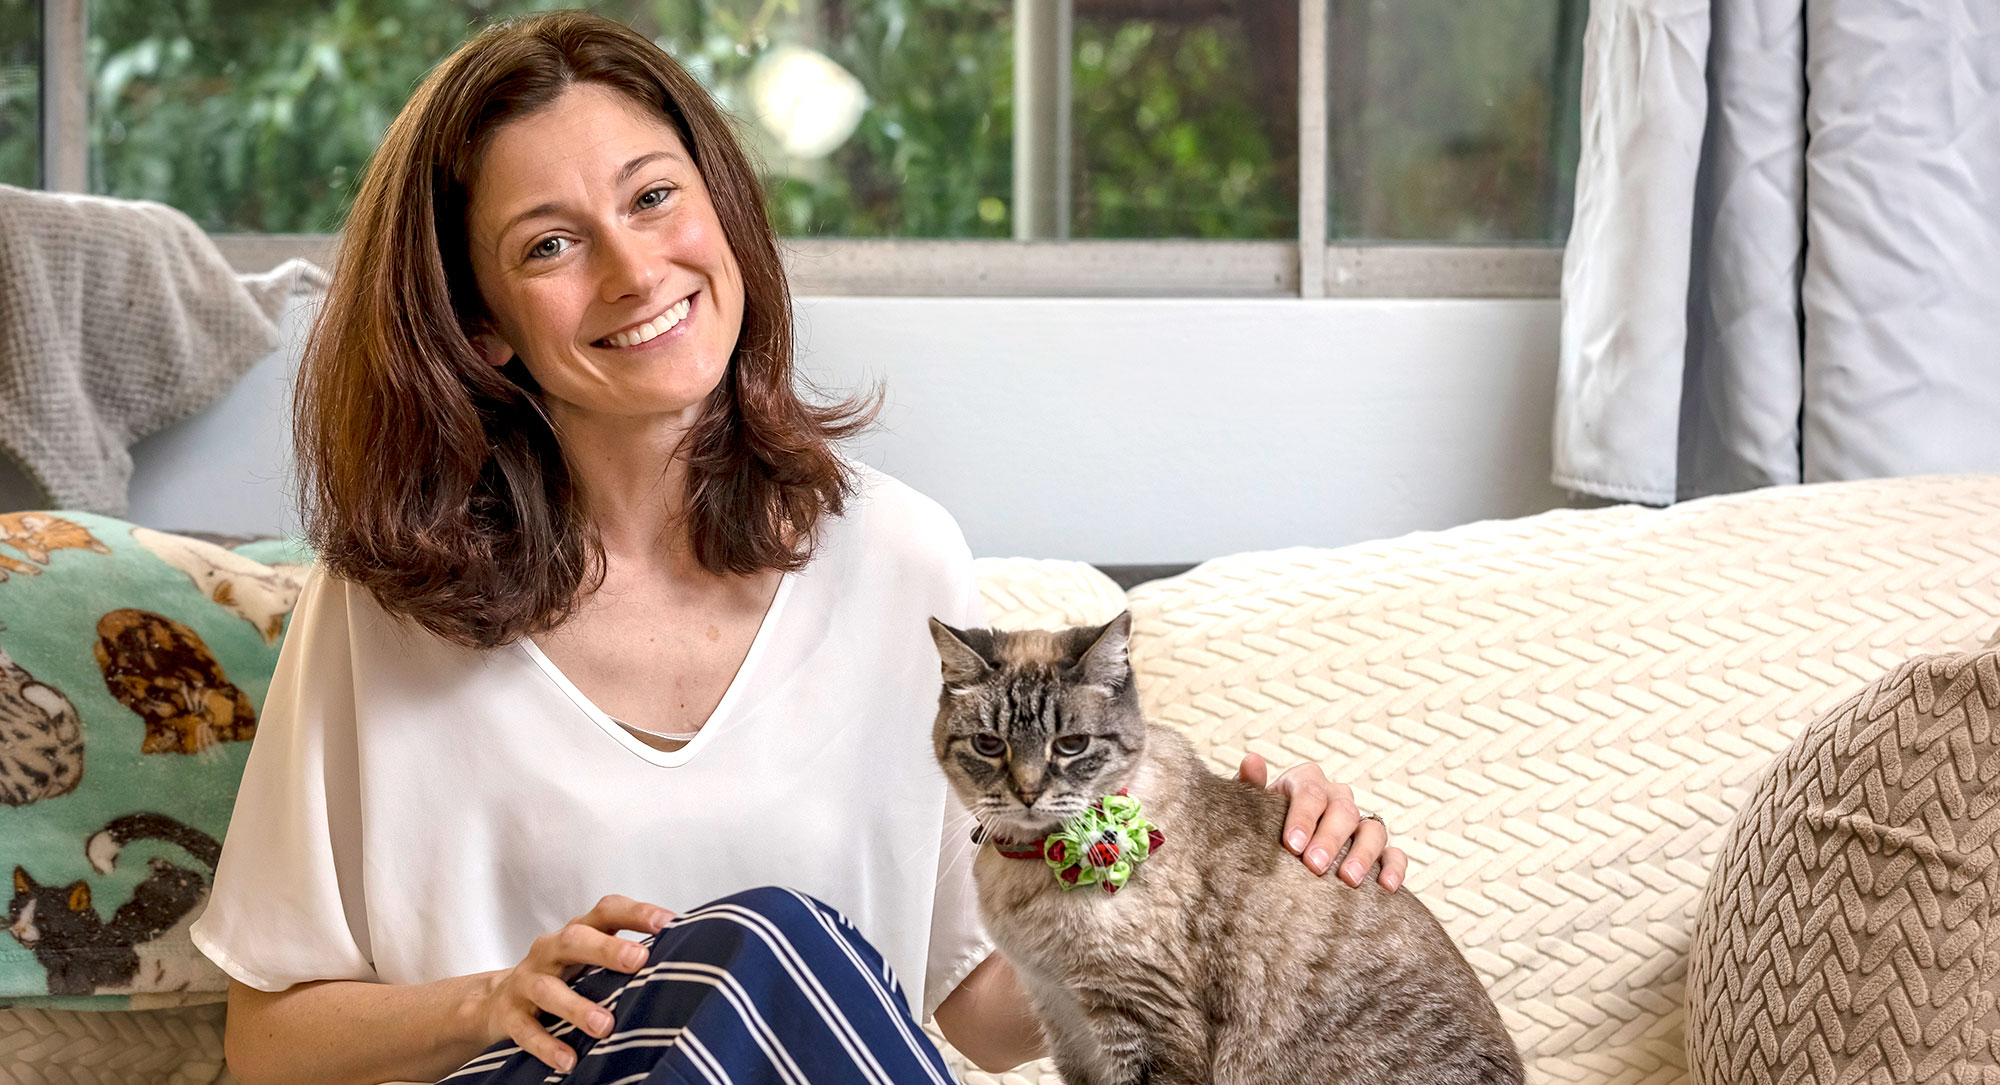 Natasha is wearing a white blouse and blue pants with white stripes. She is sitting on a cream couch with her tabby cat next to her.